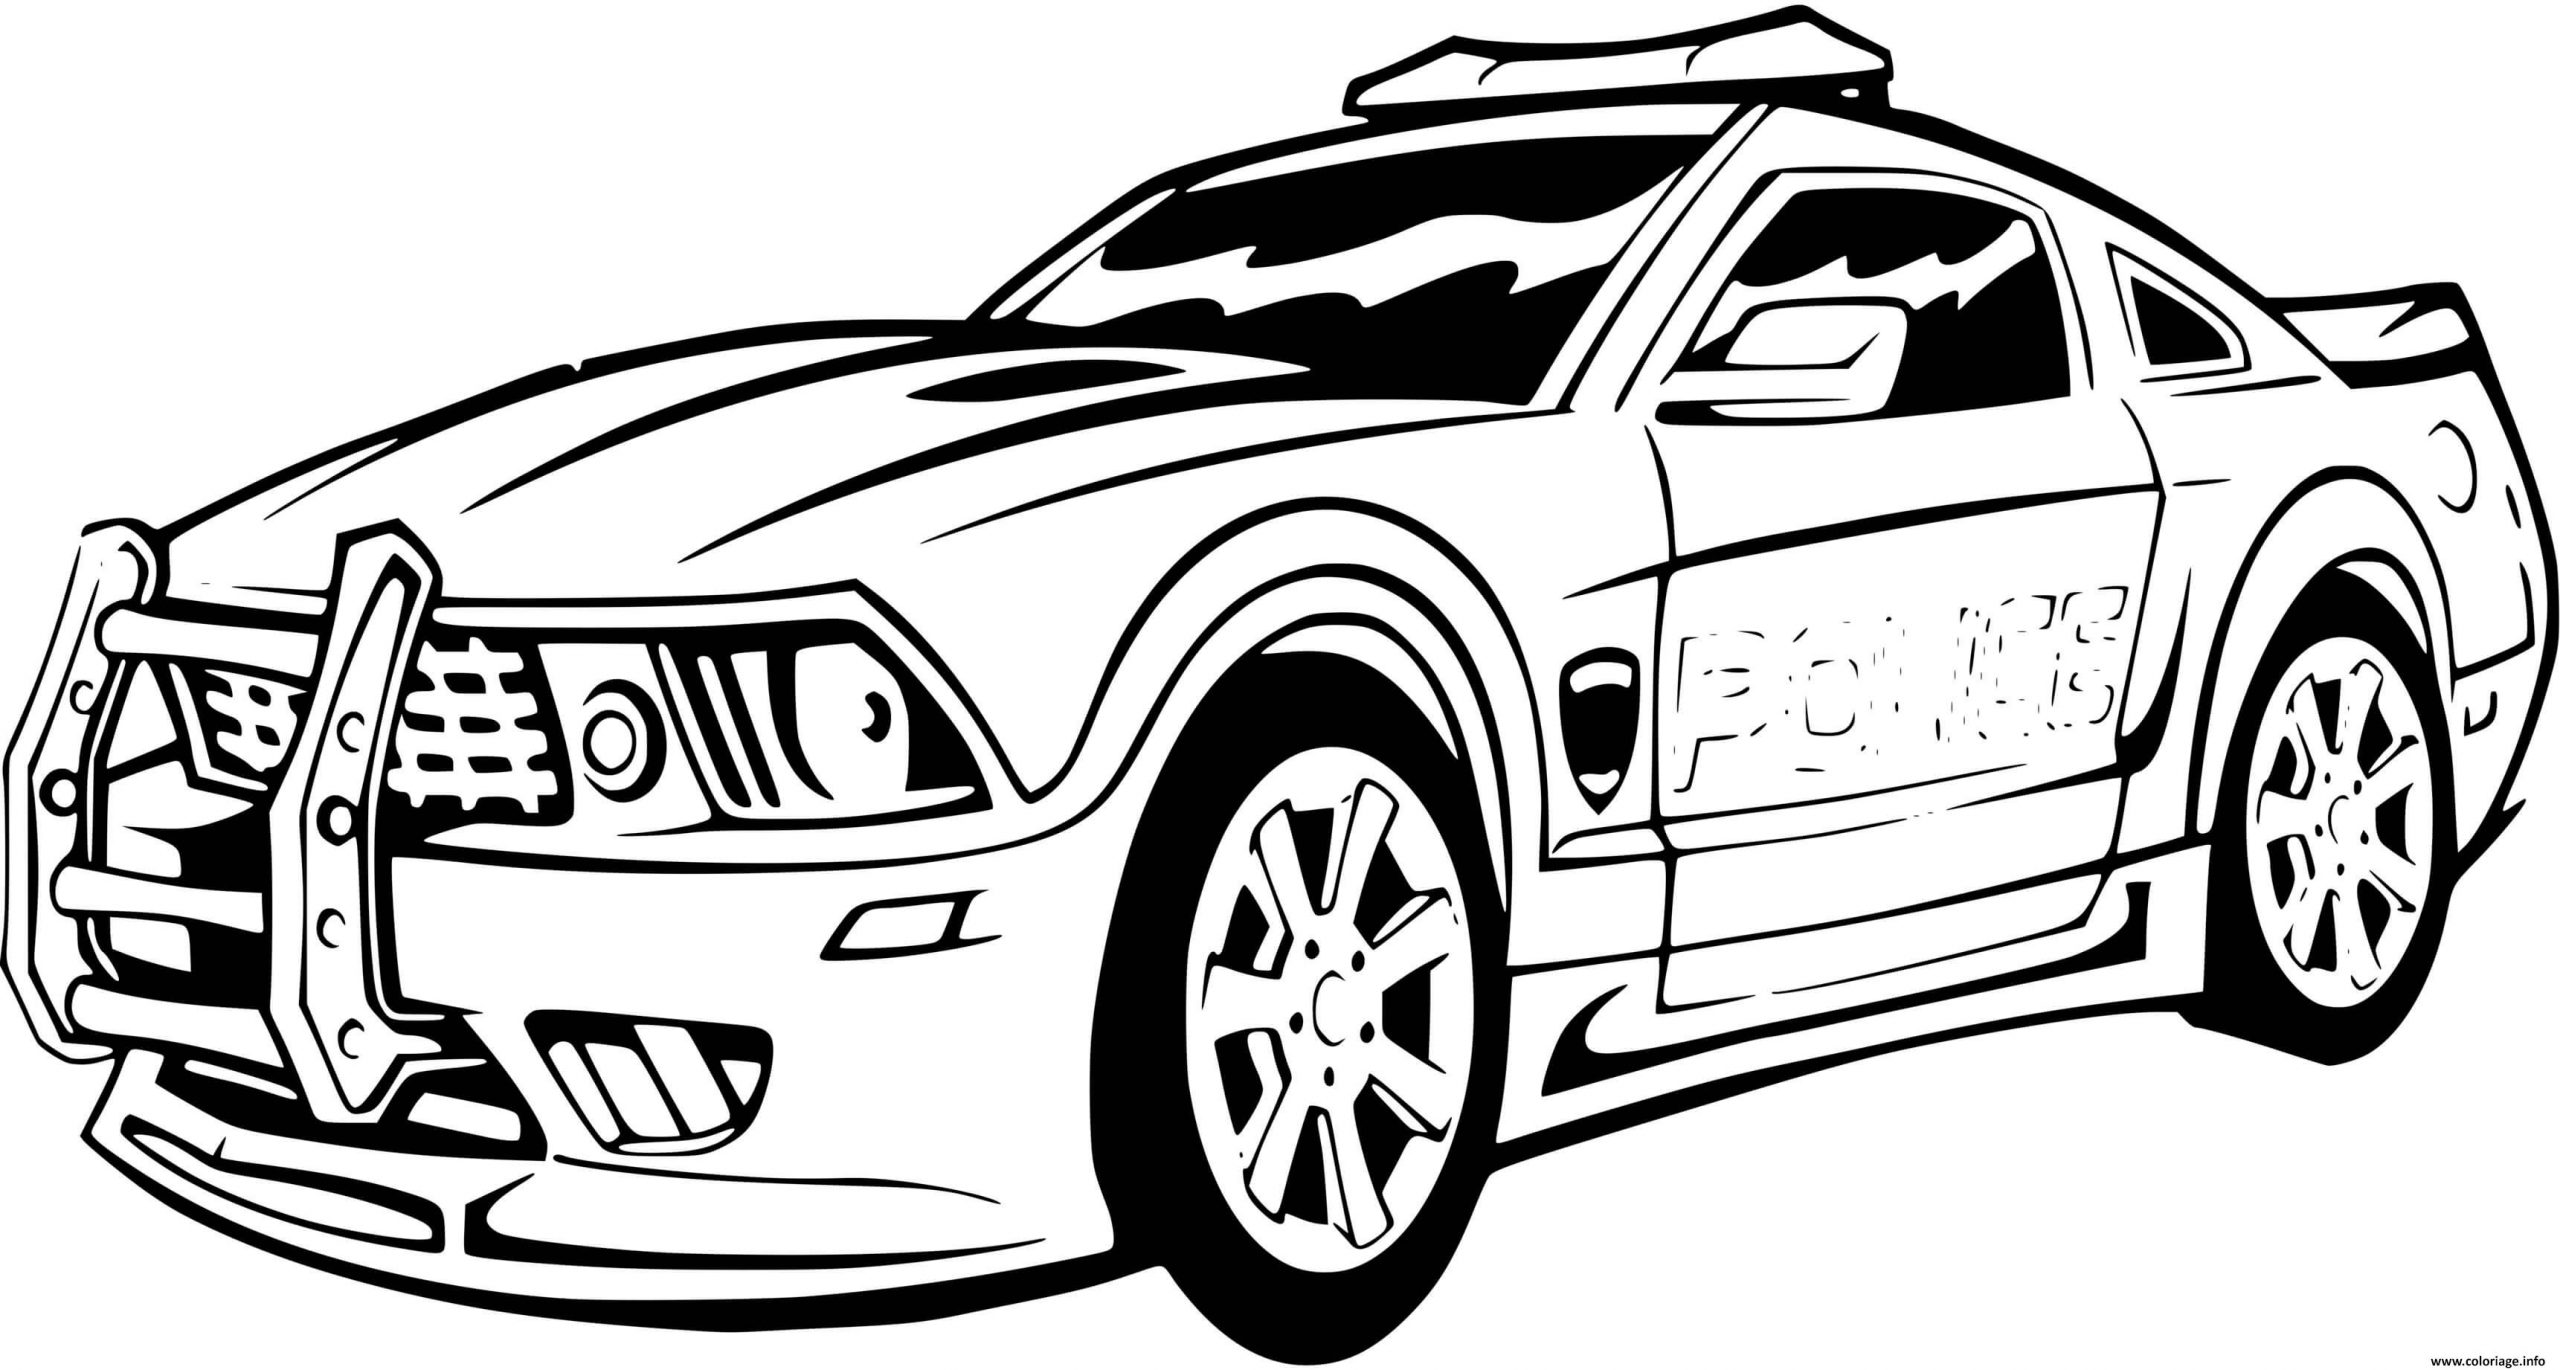 Coloriage Voiture De Police Sport Mustang Ford Dessin à Coloriage Voiture De Course 